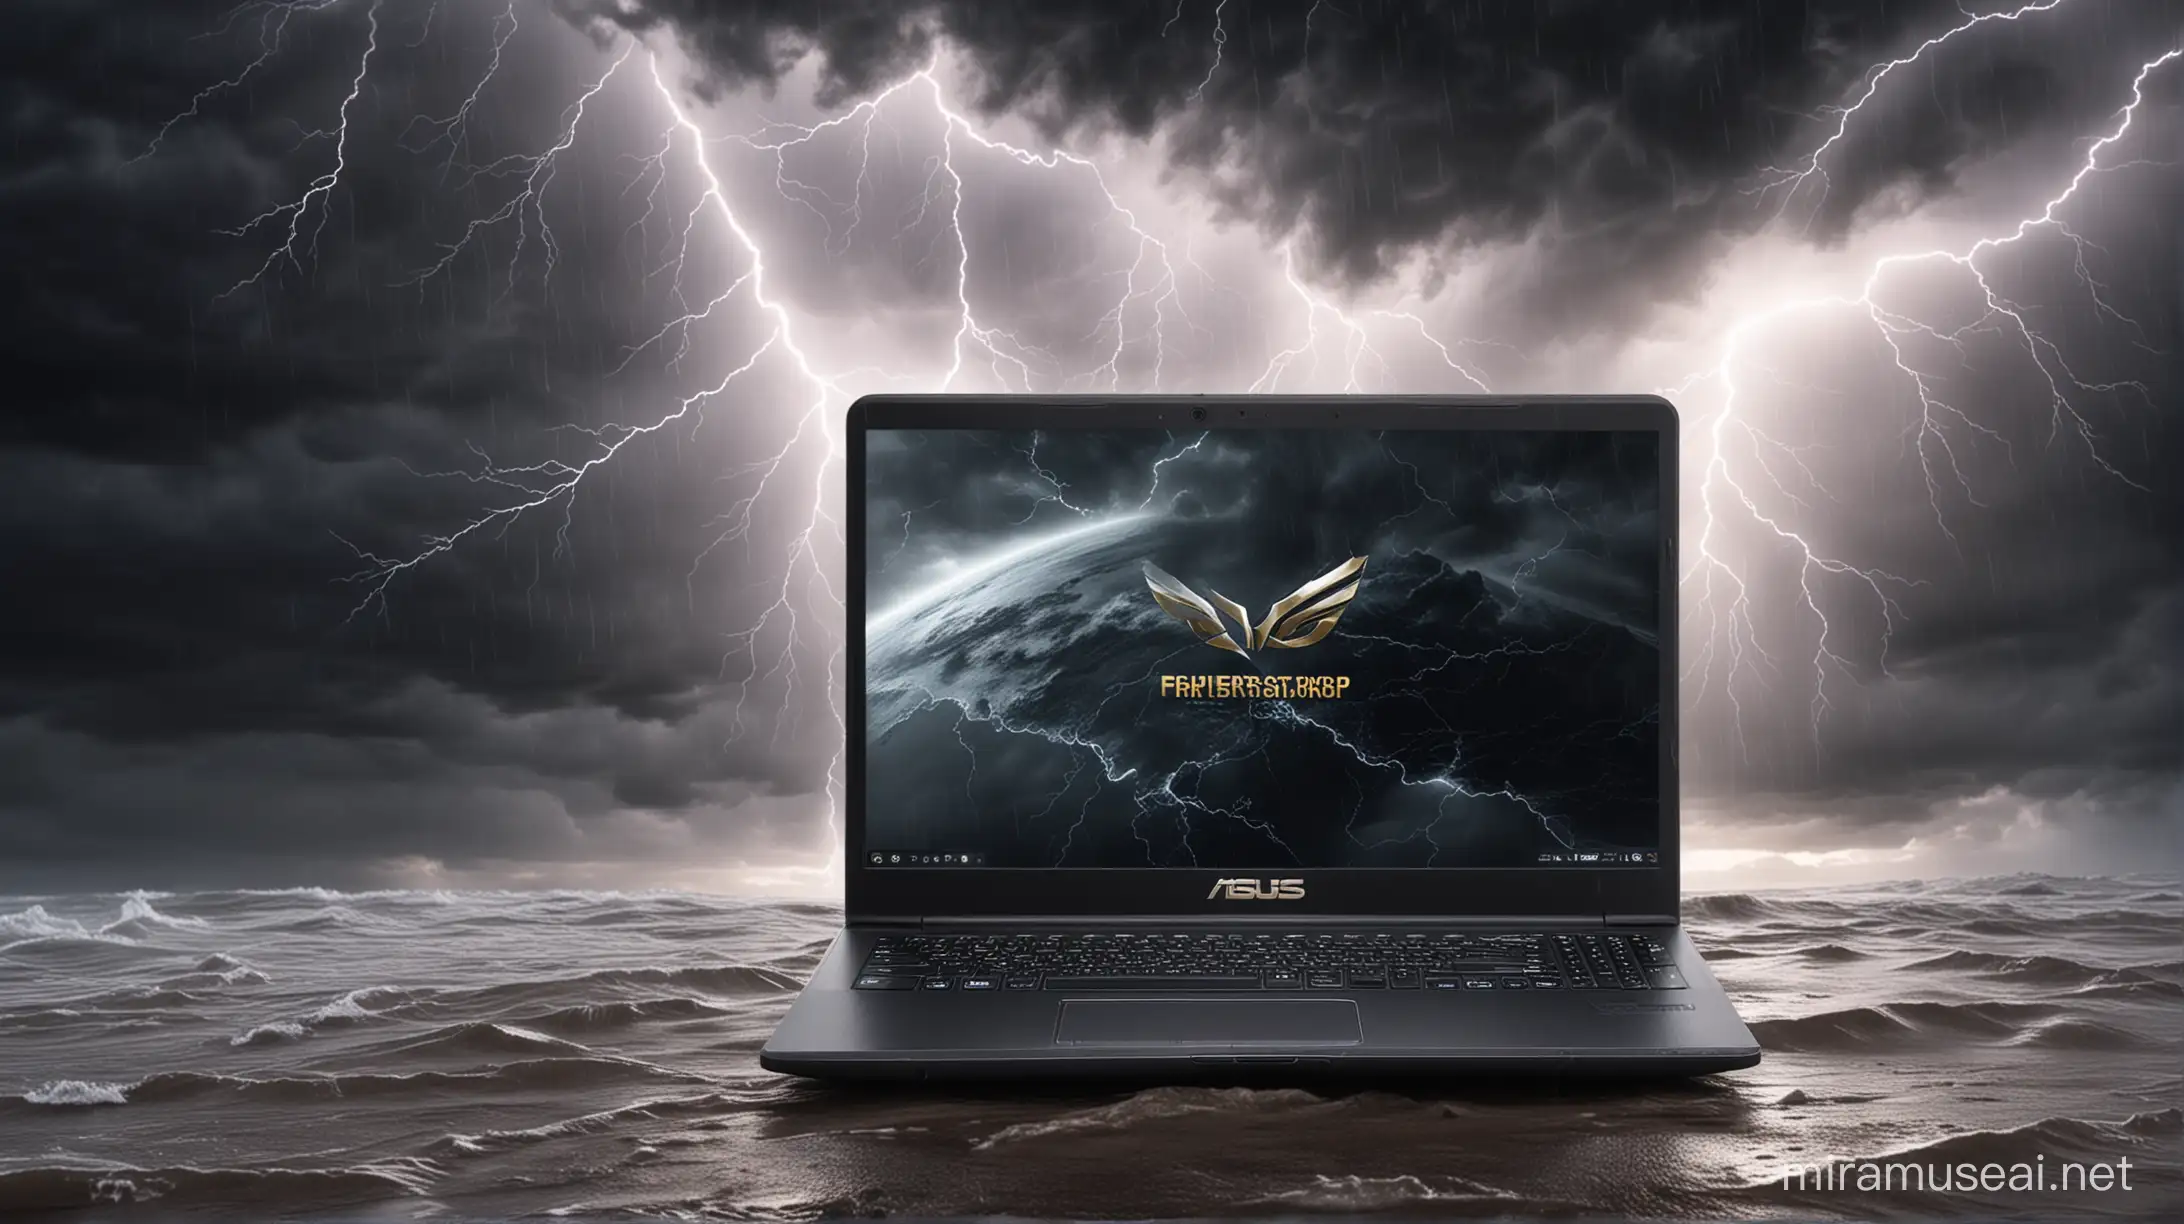 Immersive marketing campaign featuring ASUS laptop in a powerful storm theme